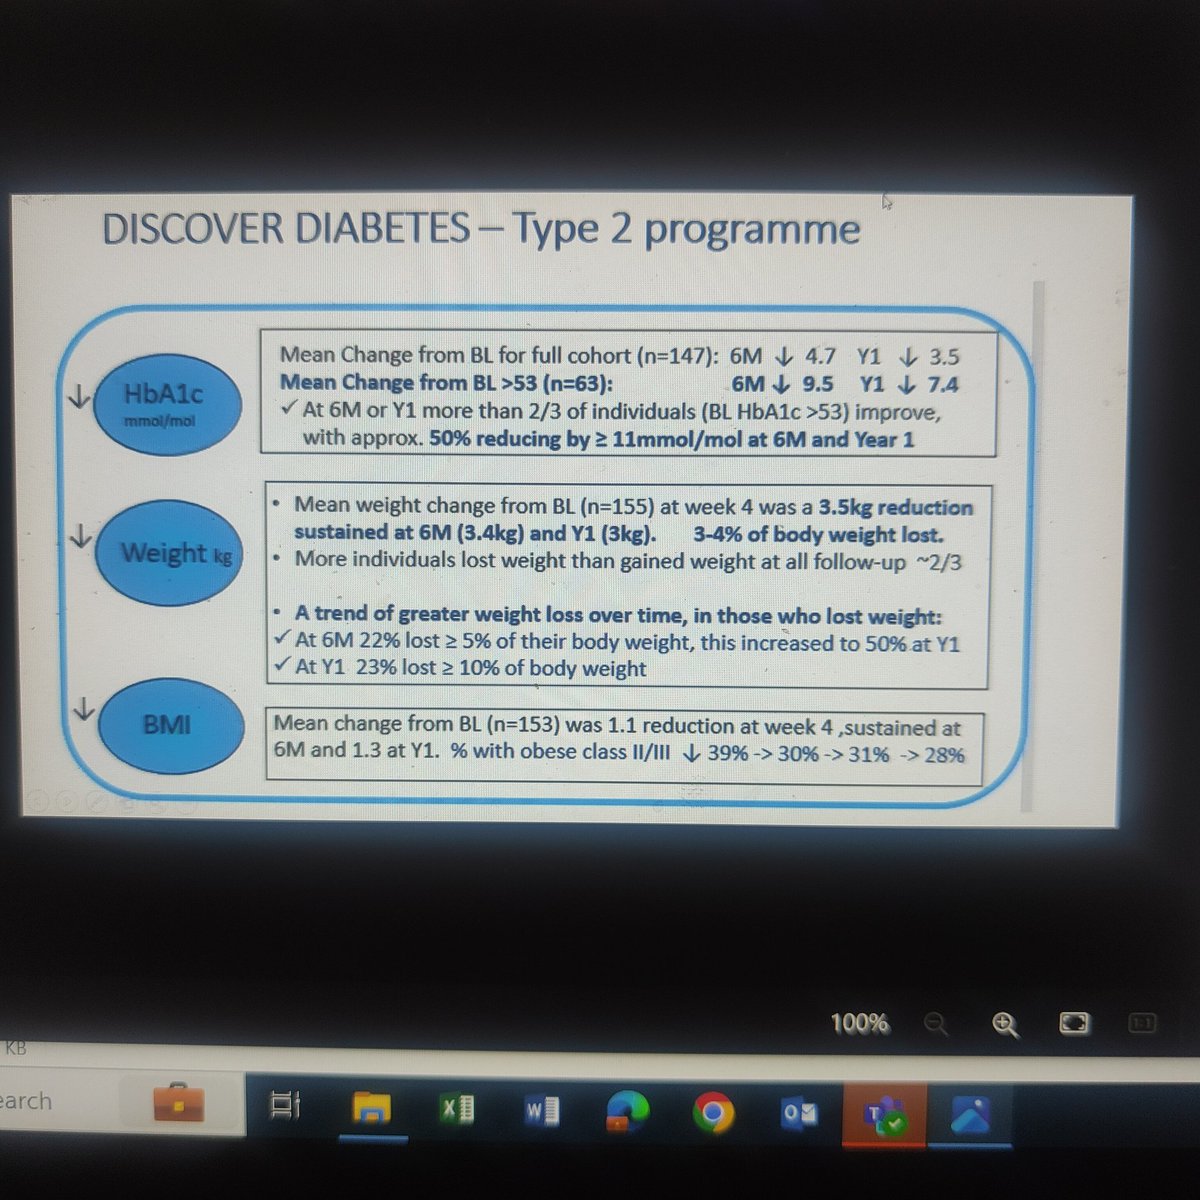 Another fantastic update today from #KarenHarrington on #NCPDIABETES HSE developed, Dietetic led, structured education program for #T2DM #DiscoverDiabetes Fantastic results to date. Supporting people with Diabetes in attaining knowledge, skills and confidence in self management